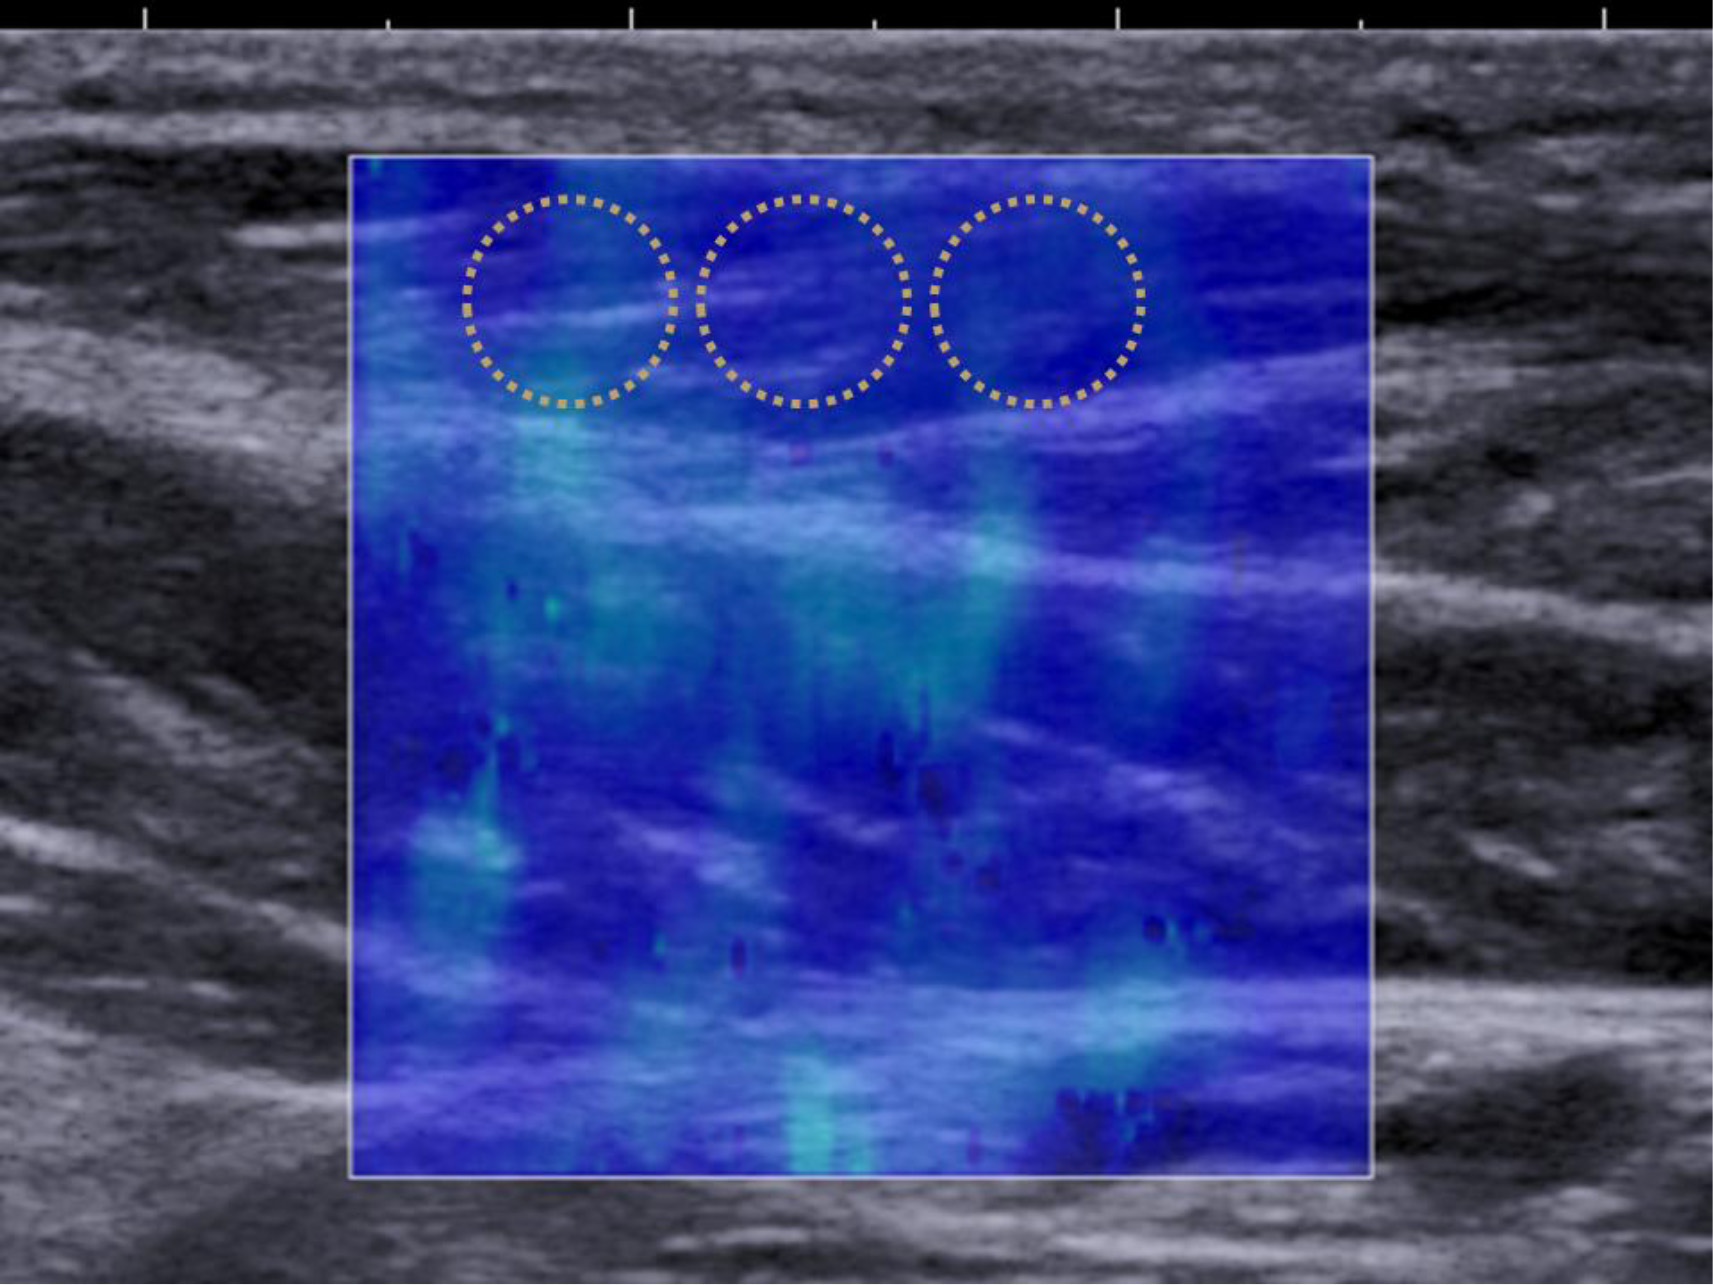 Shear wave elastography image and measurement of Young’s modulus. This image shows the abductor hallucis. The Young’s modulus in the area of interest enclosed in the square is displayed using color mapping. Three circled areas are set within the area of interest and the average Young’s modulus in each circle is measured in kPa. The average value of the 3 areas is set as the Young’s modulus for each image.